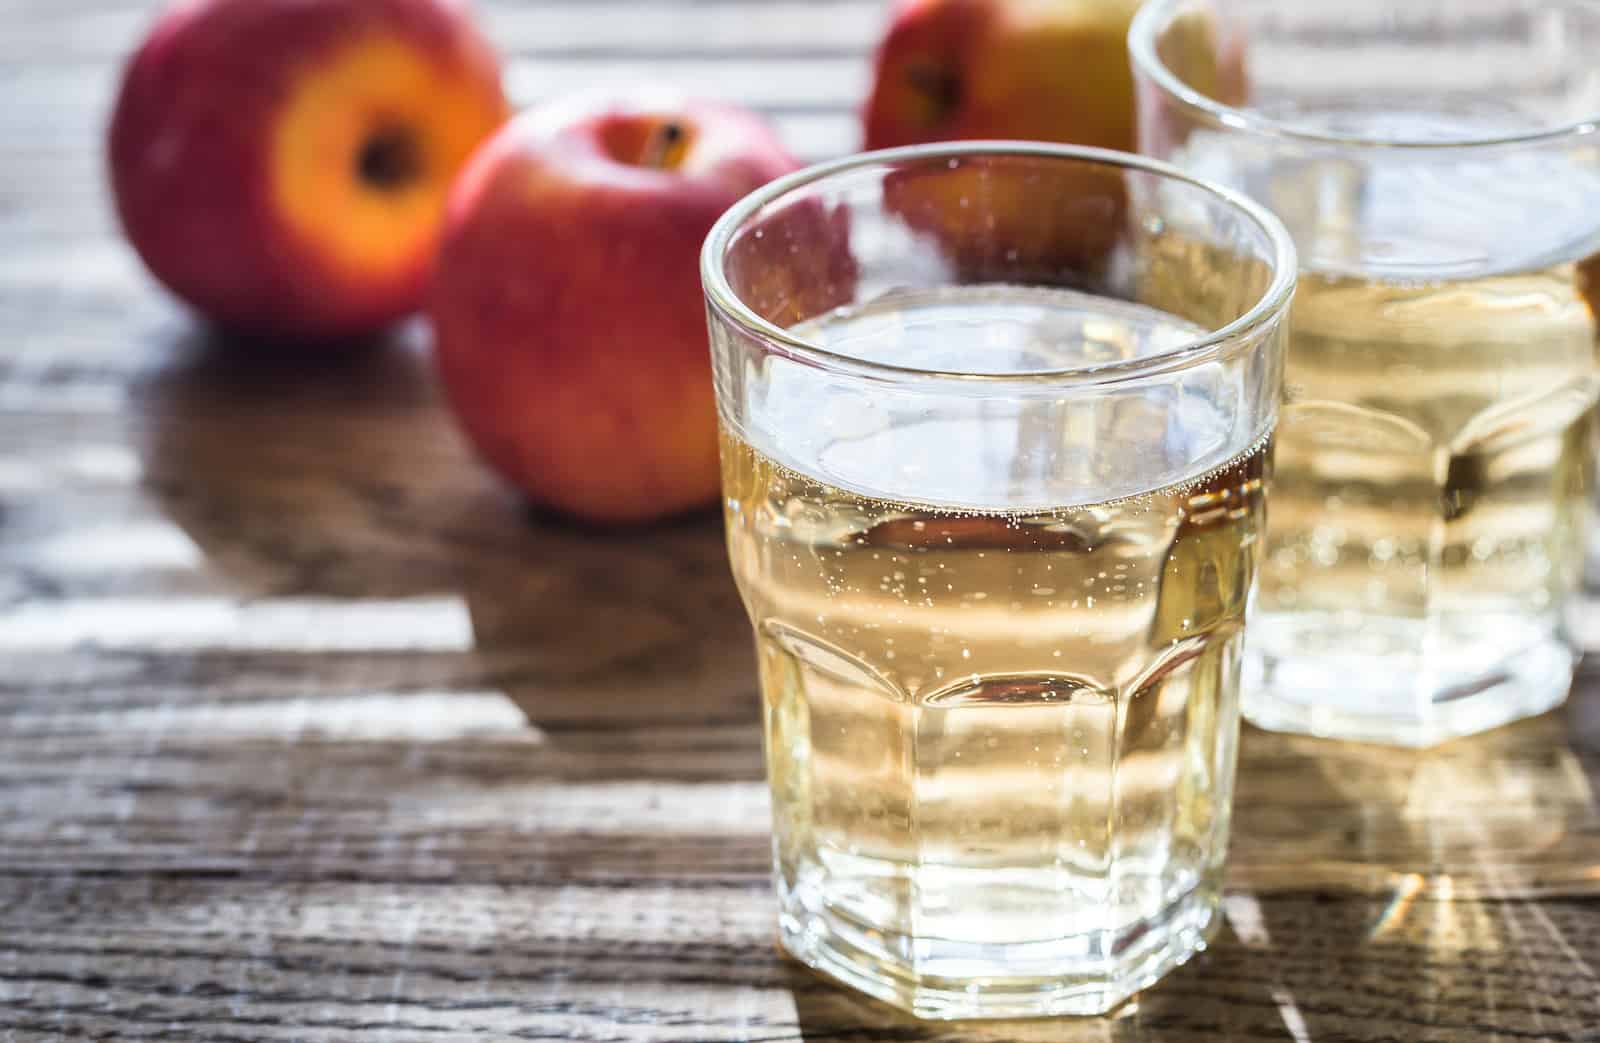 Cider and apples